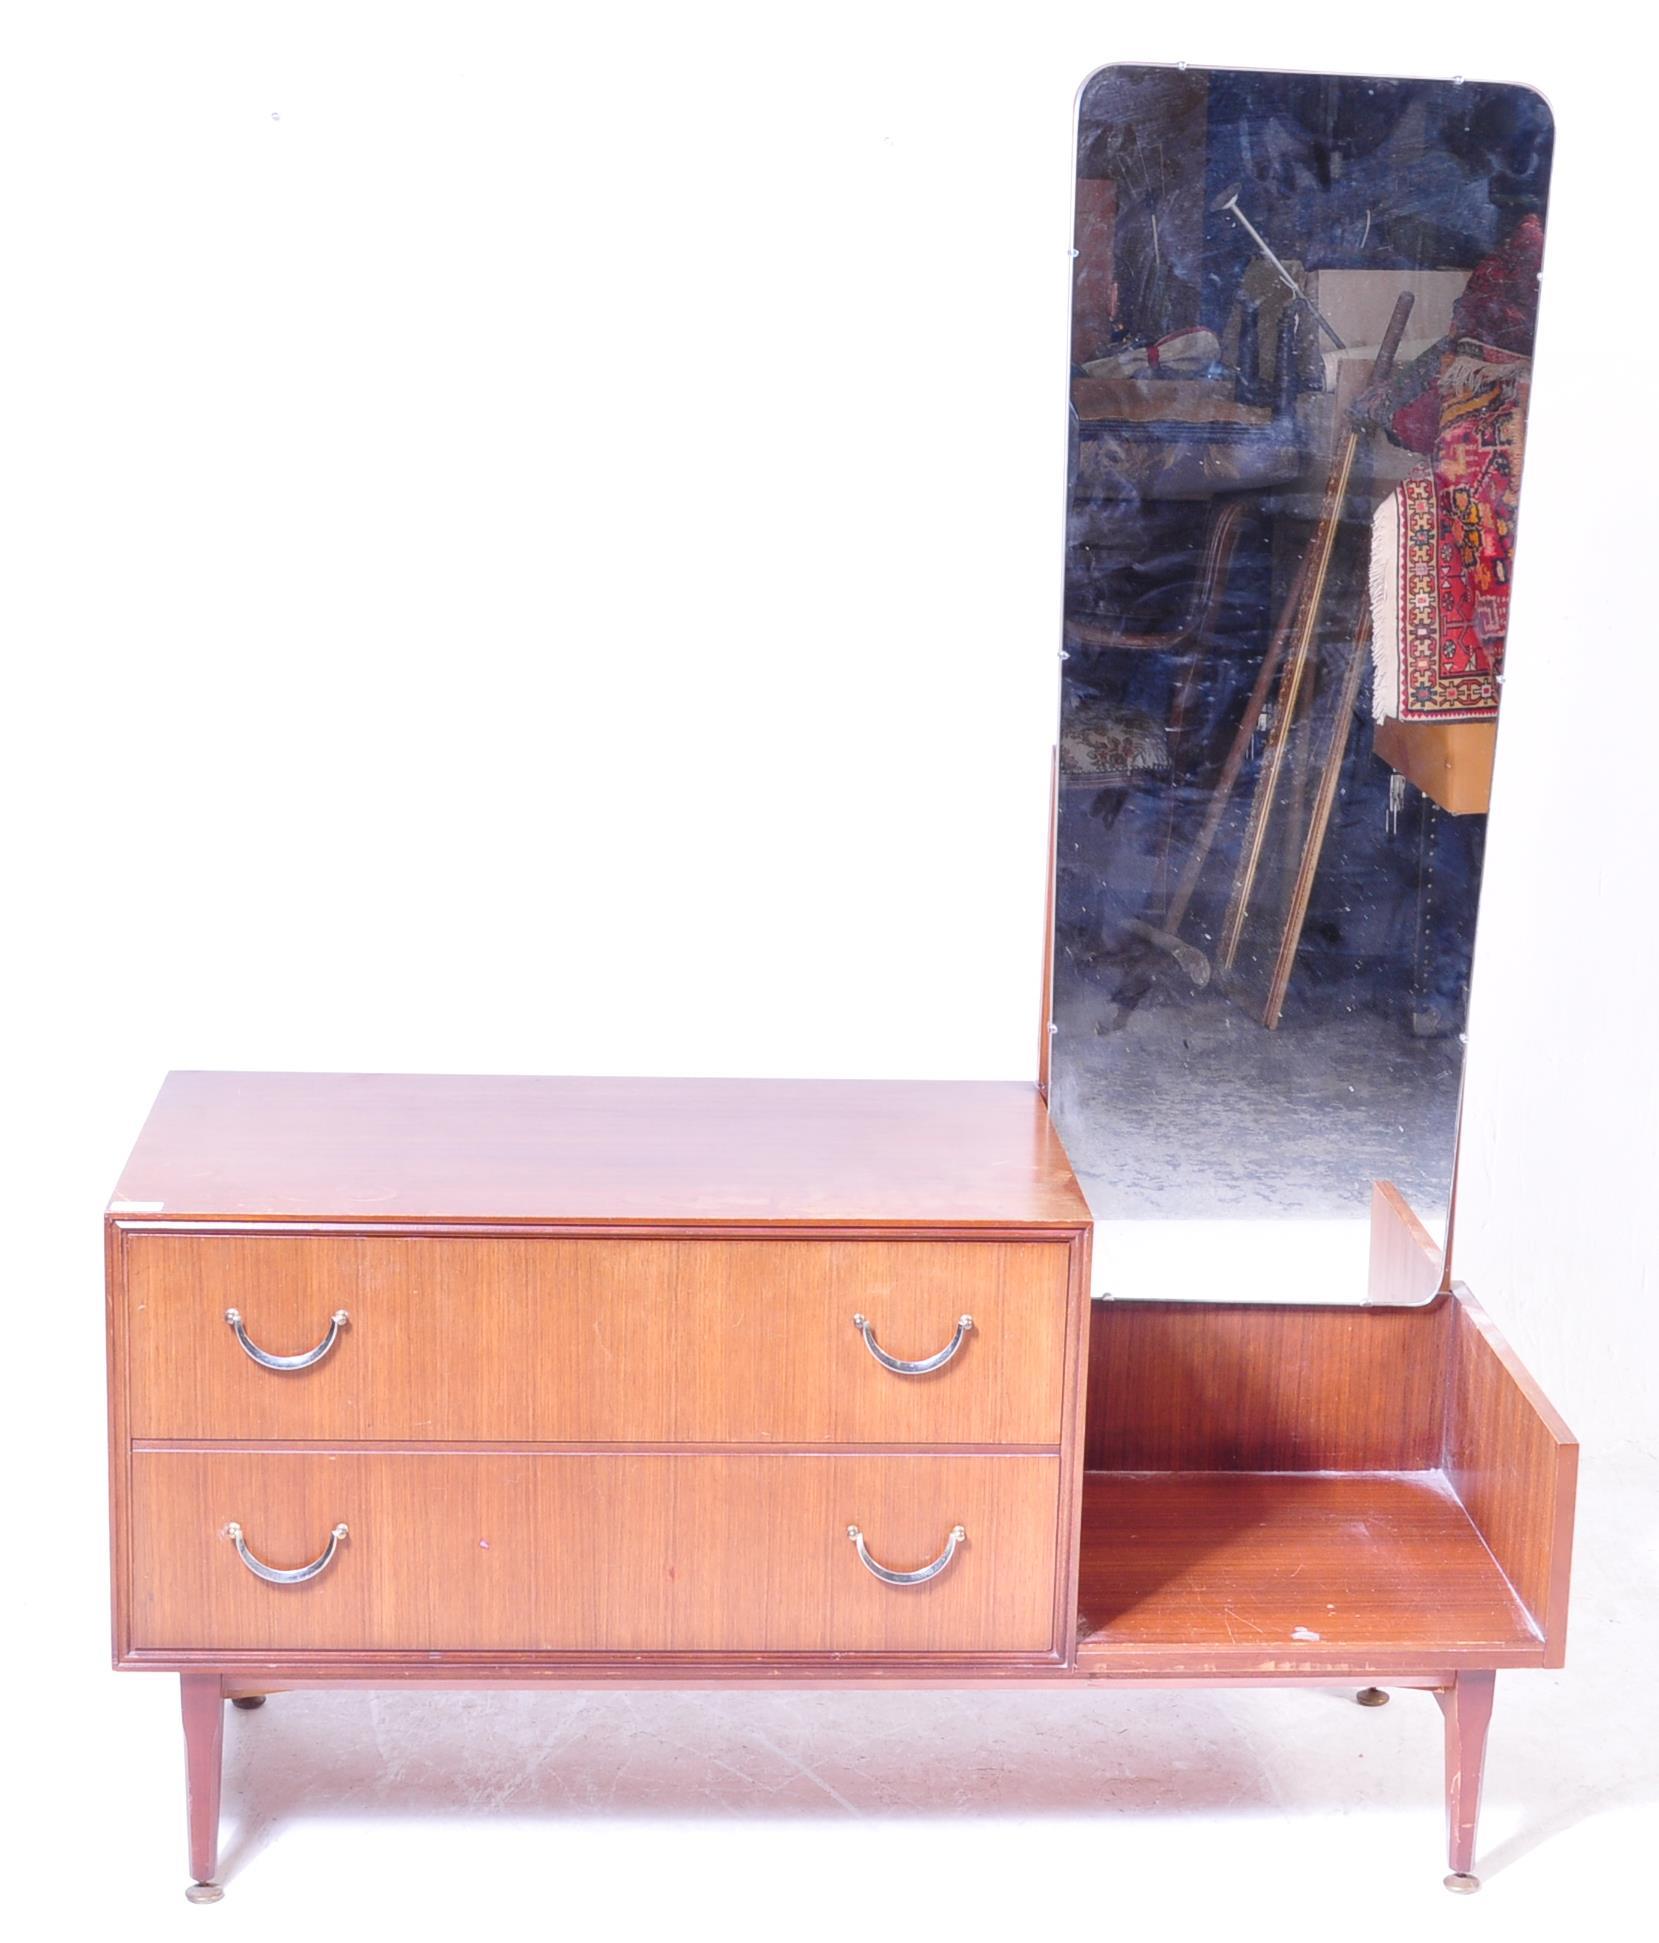 MID CENTURY TEAK WOOD DRESSING TABLE CHEST BY MEREDEW - Image 2 of 7